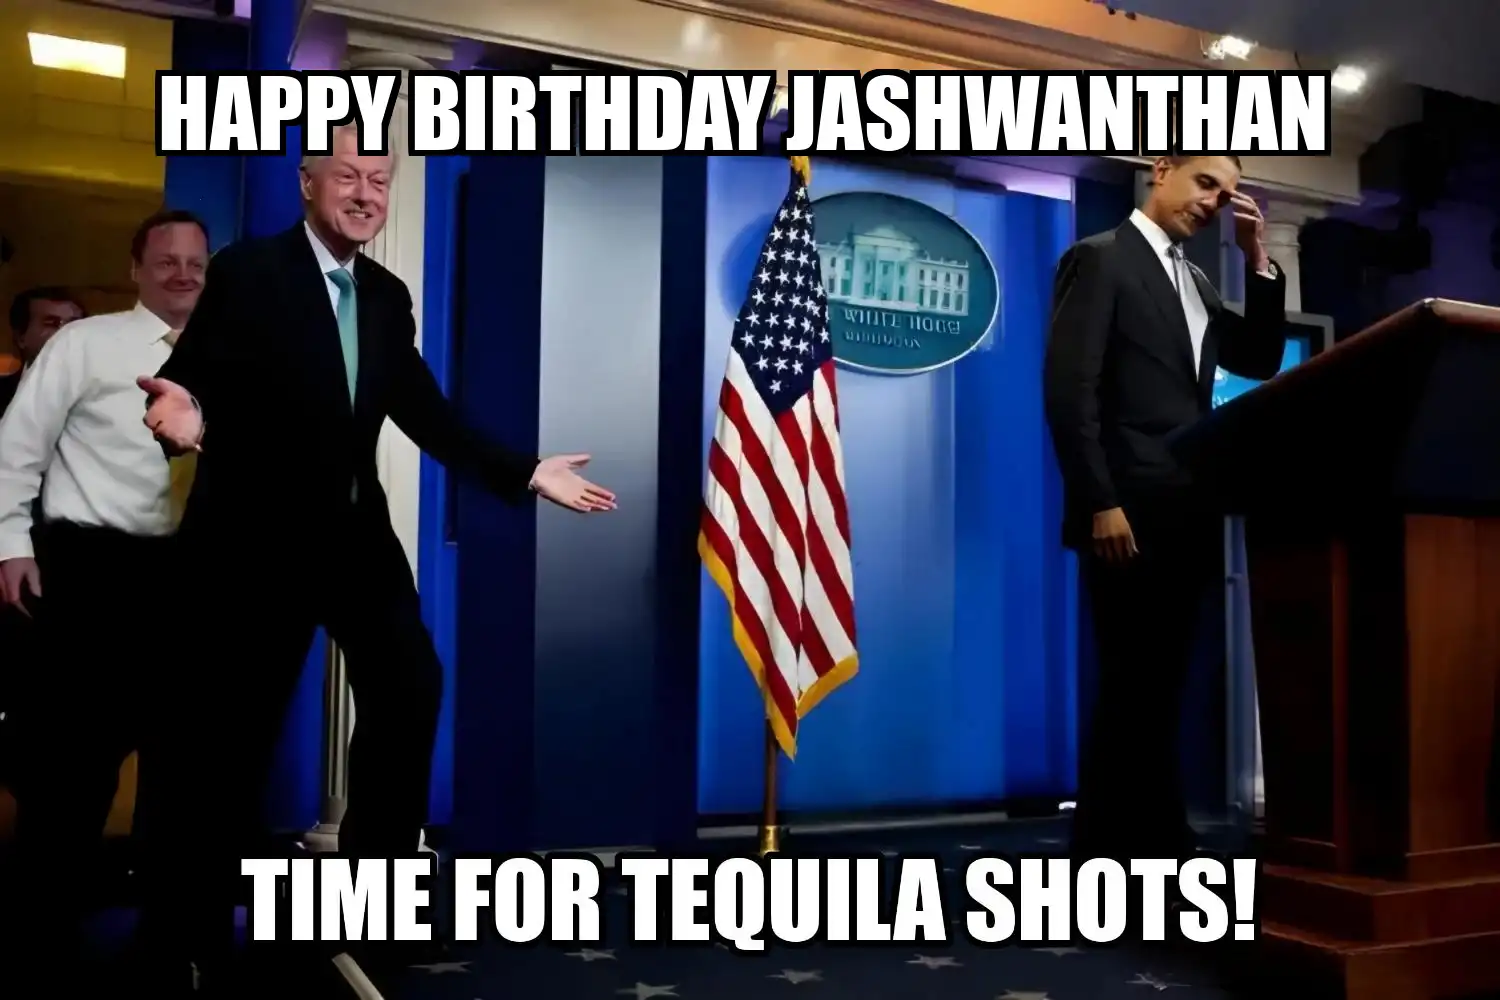 Happy Birthday Jashwanthan Time For Tequila Shots Memes